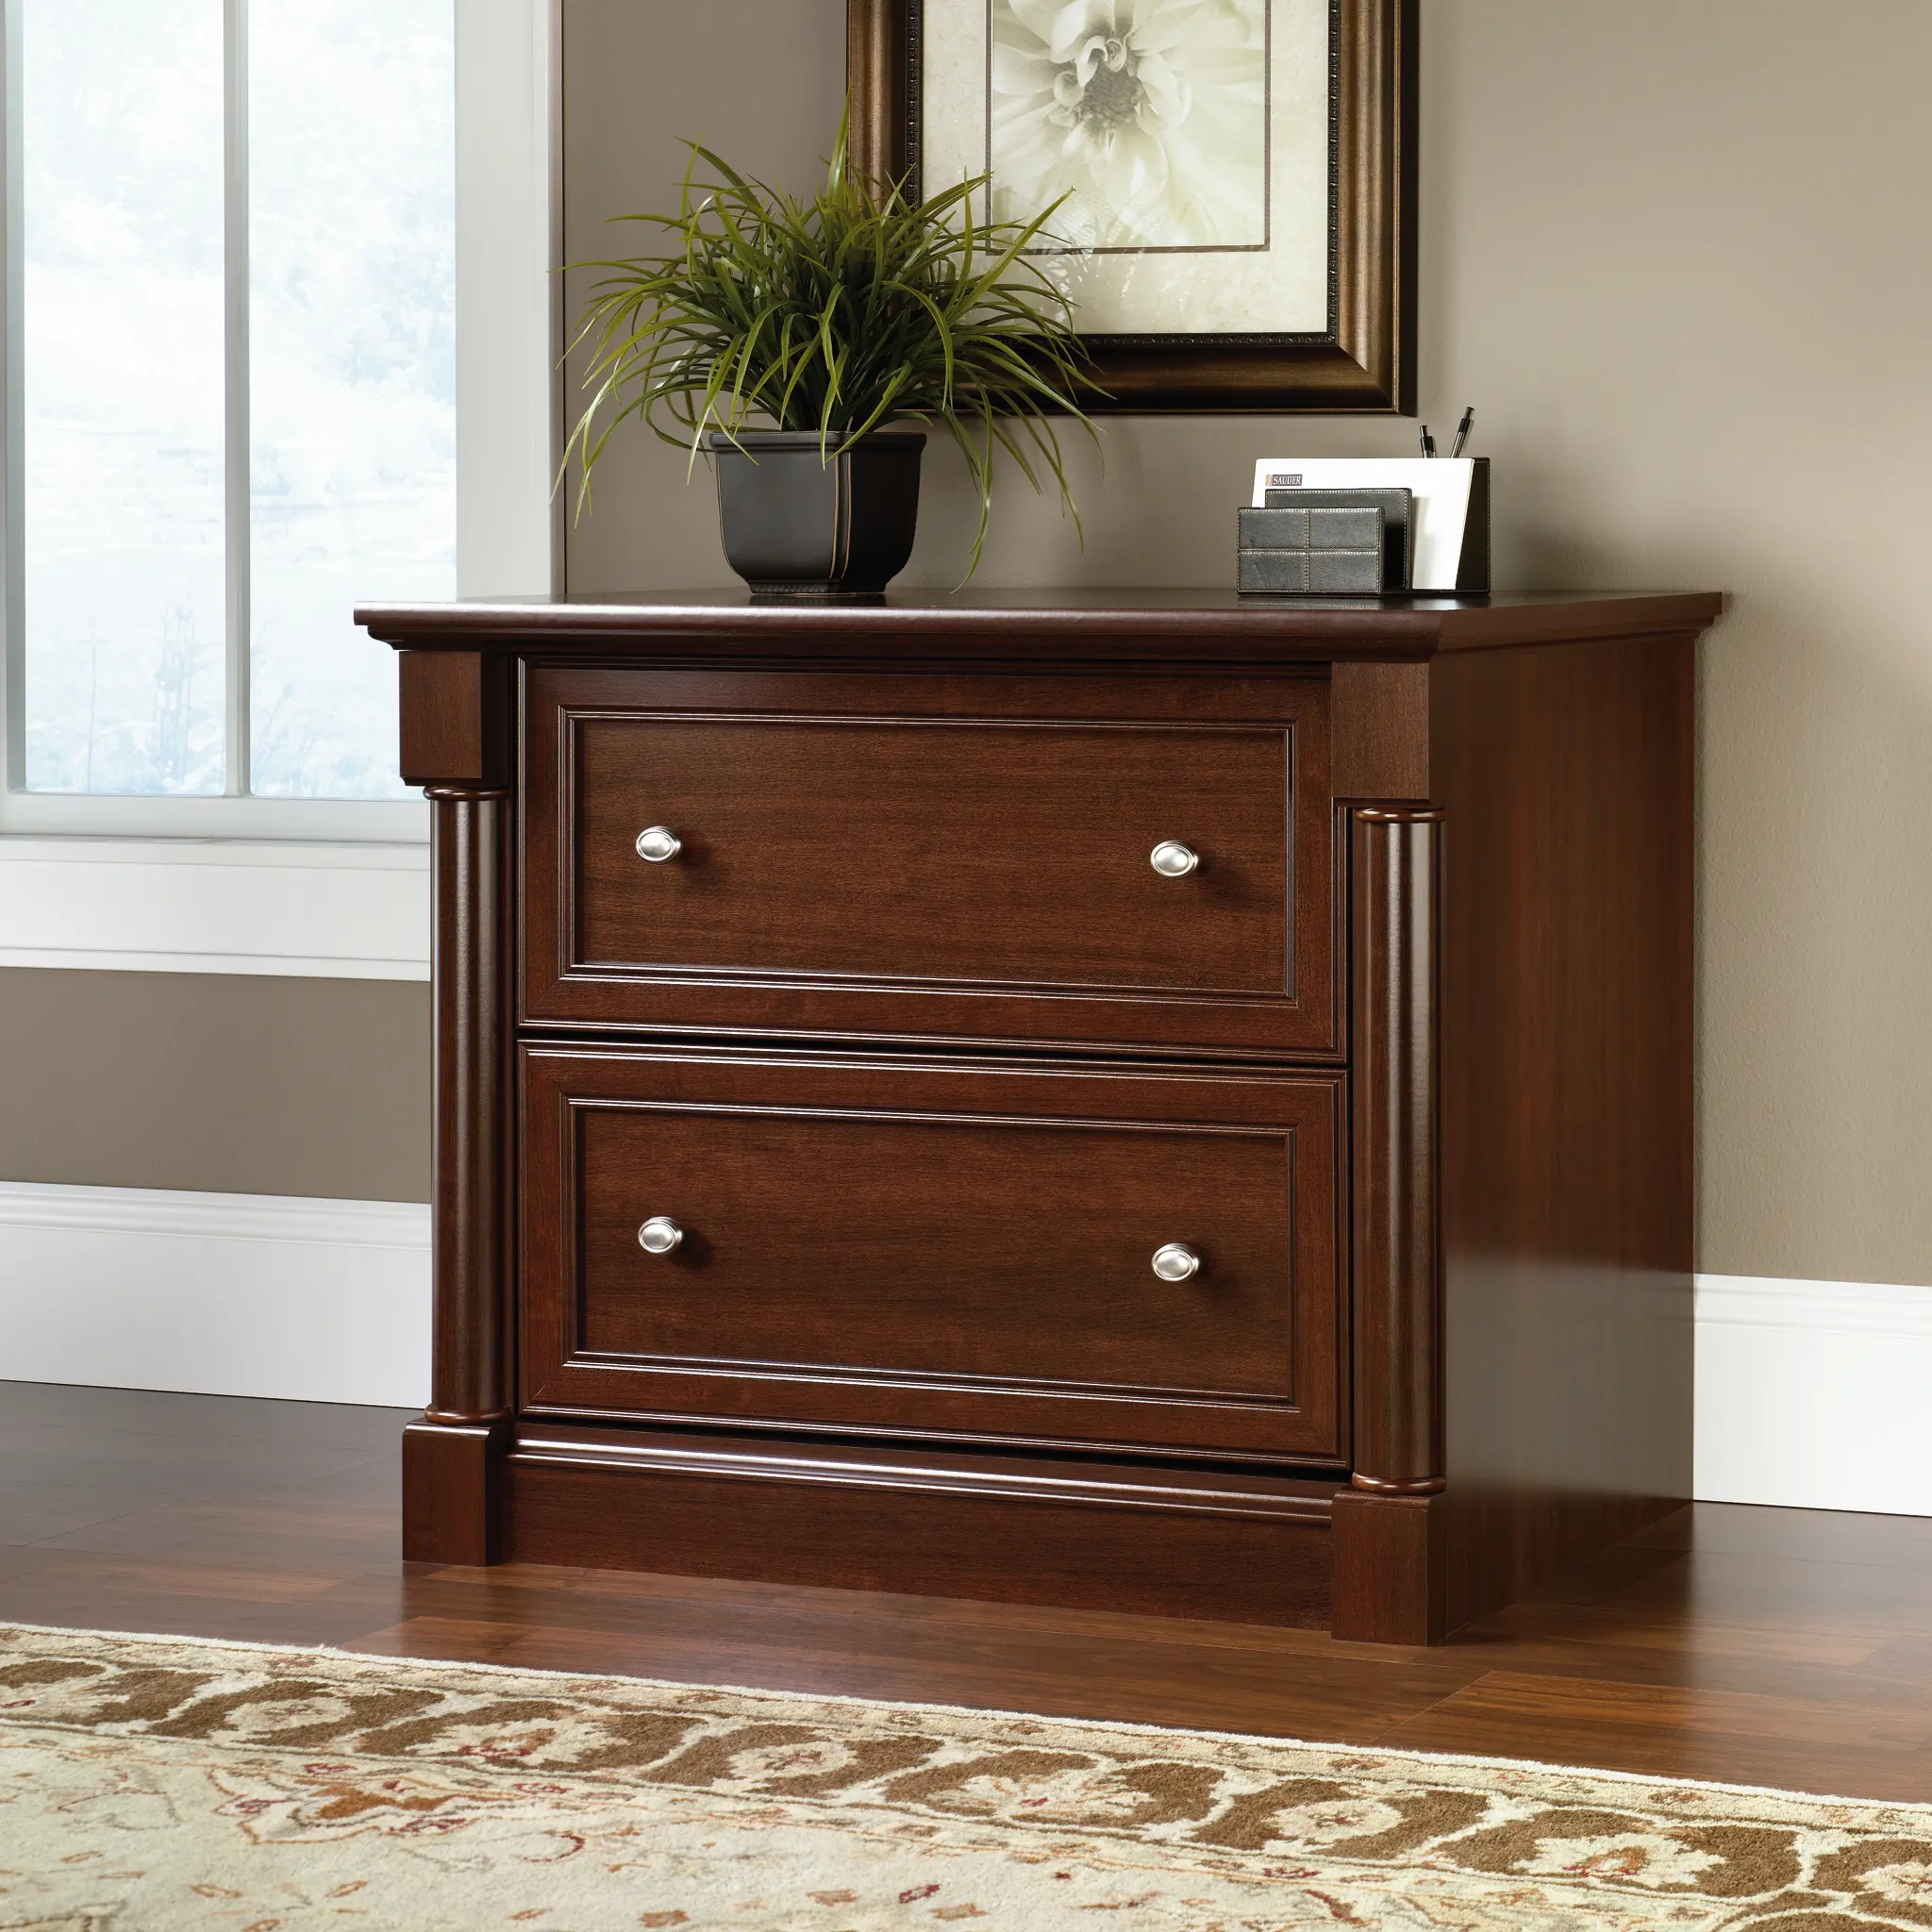 412015 Palladia Cherry 2 Drawer Lateral File Cabinet sku 412015